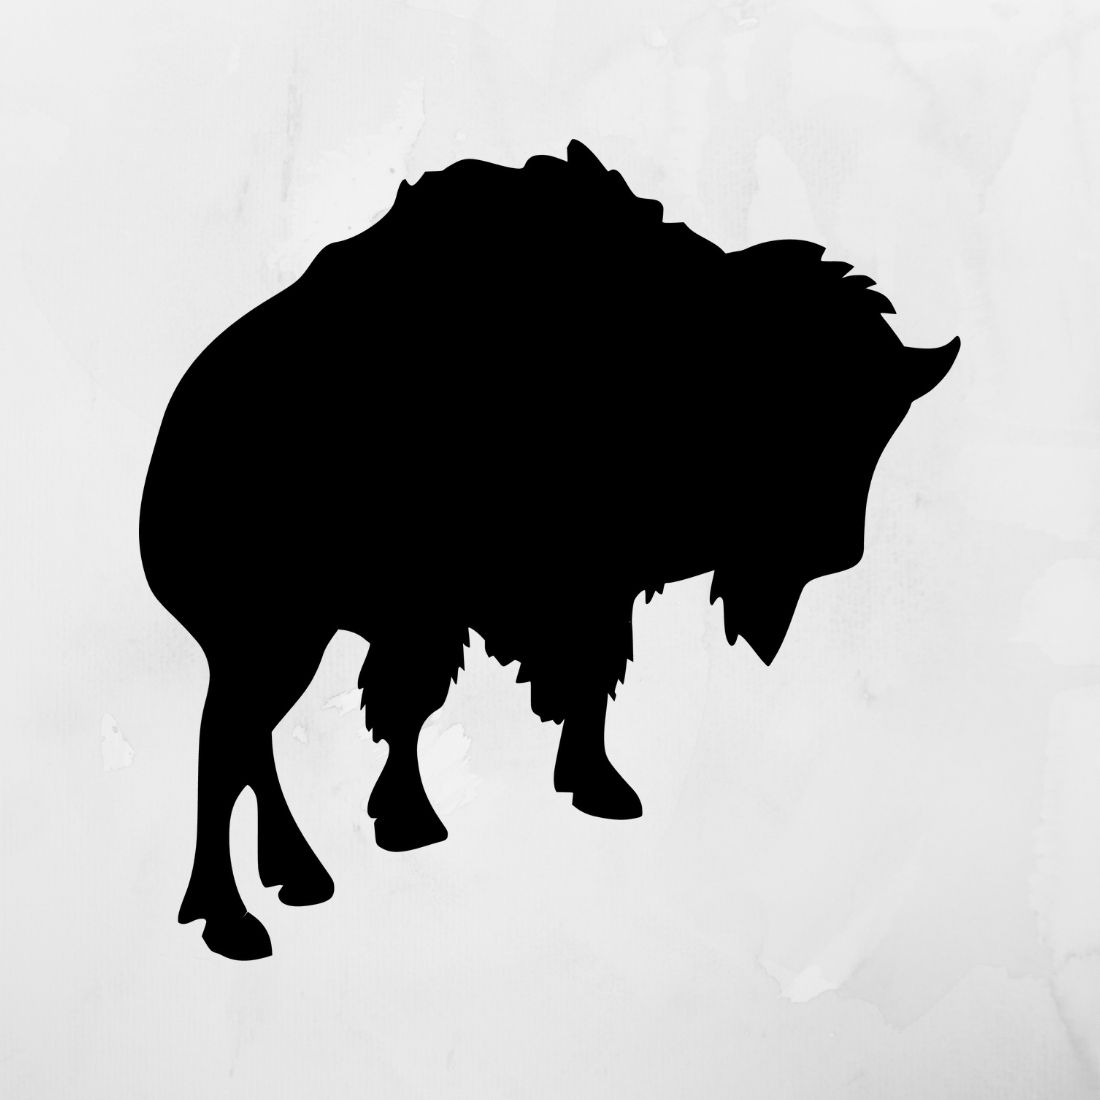 Bison SVG – Bison Silhouette cover.